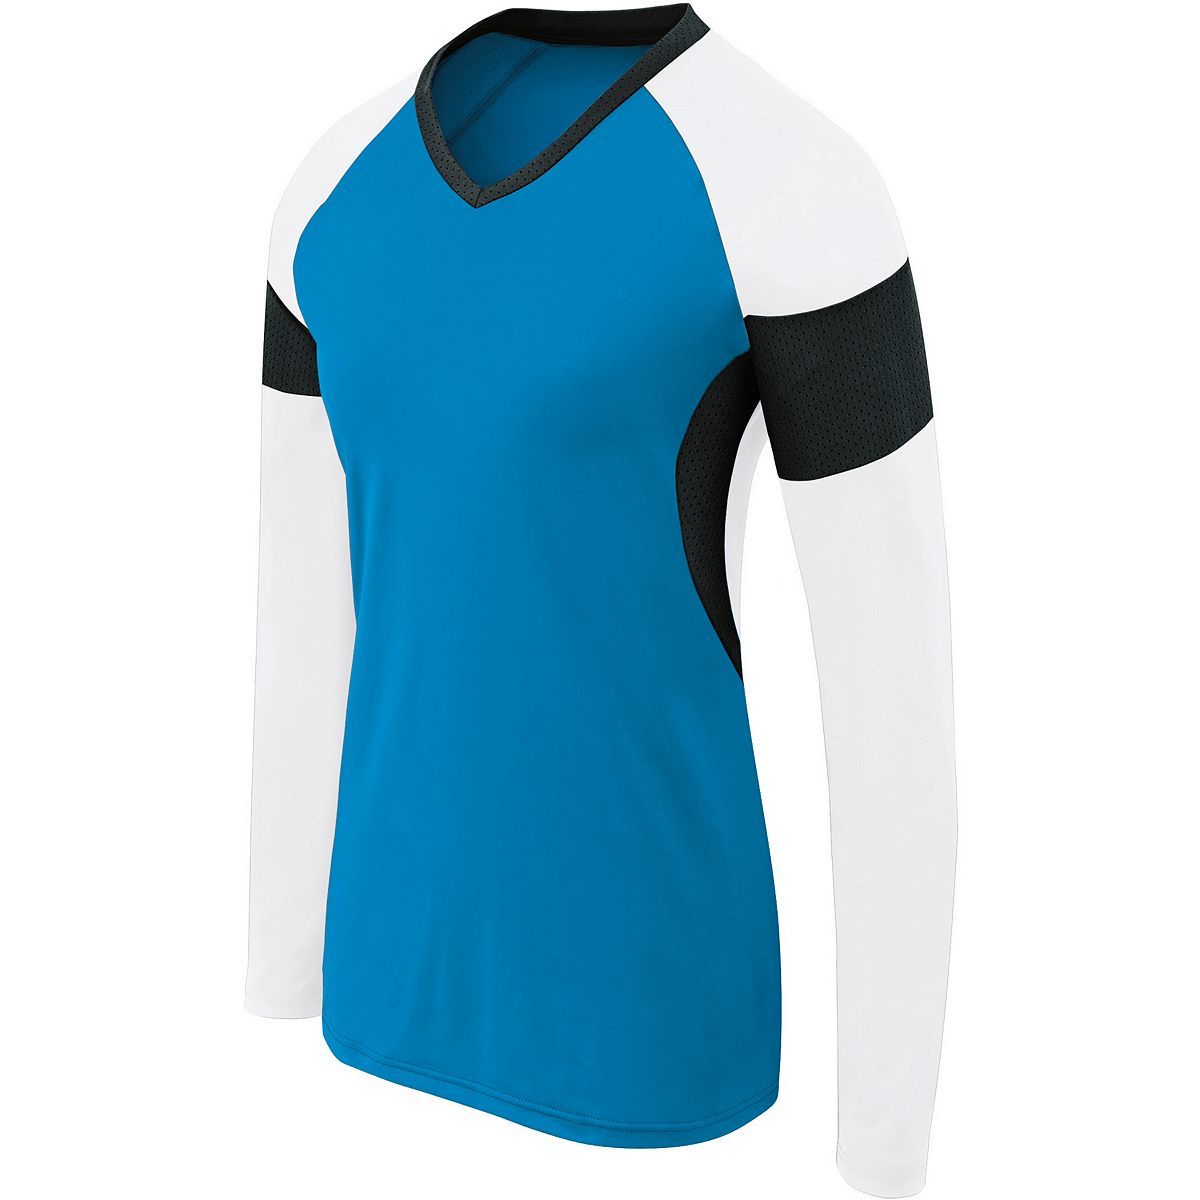 High 5 Ladies Long Sleeve Raptor Jersey in Power Blue/White/Black  -Part of the Ladies, Ladies-Jersey, High5-Products, Volleyball, Shirts product lines at KanaleyCreations.com